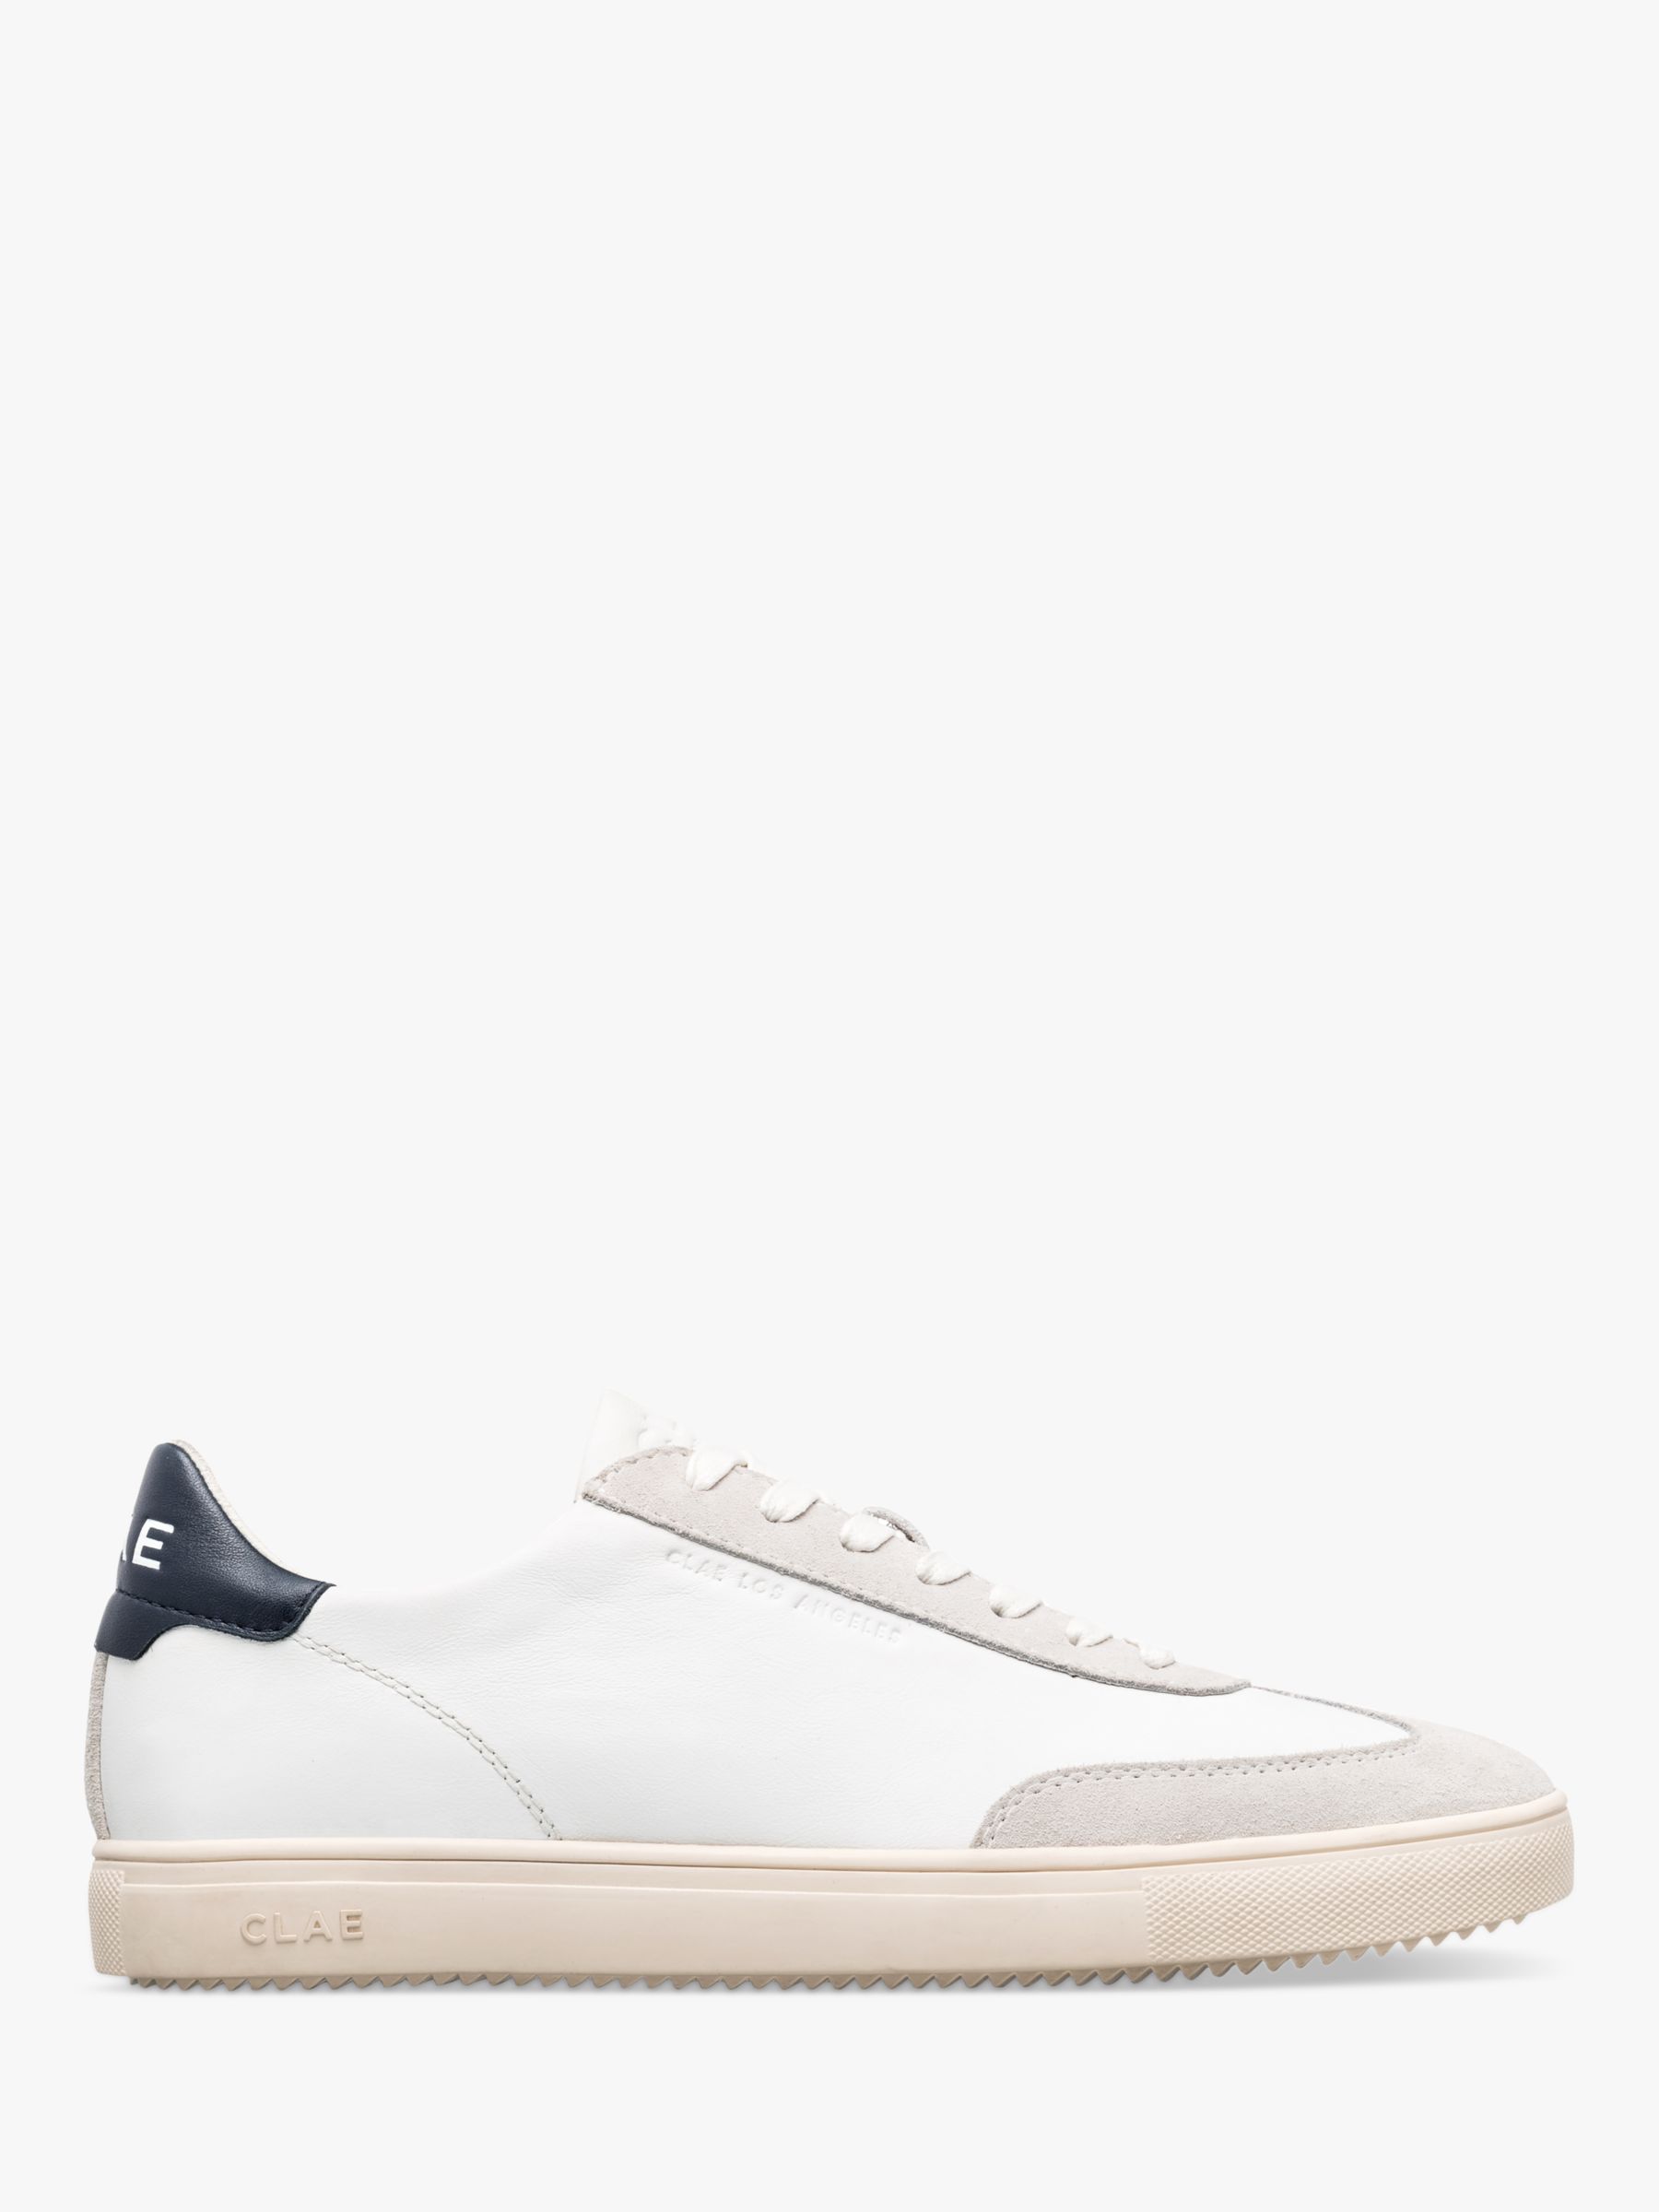 CLAE Deane Lace Up Suede Trainers, White